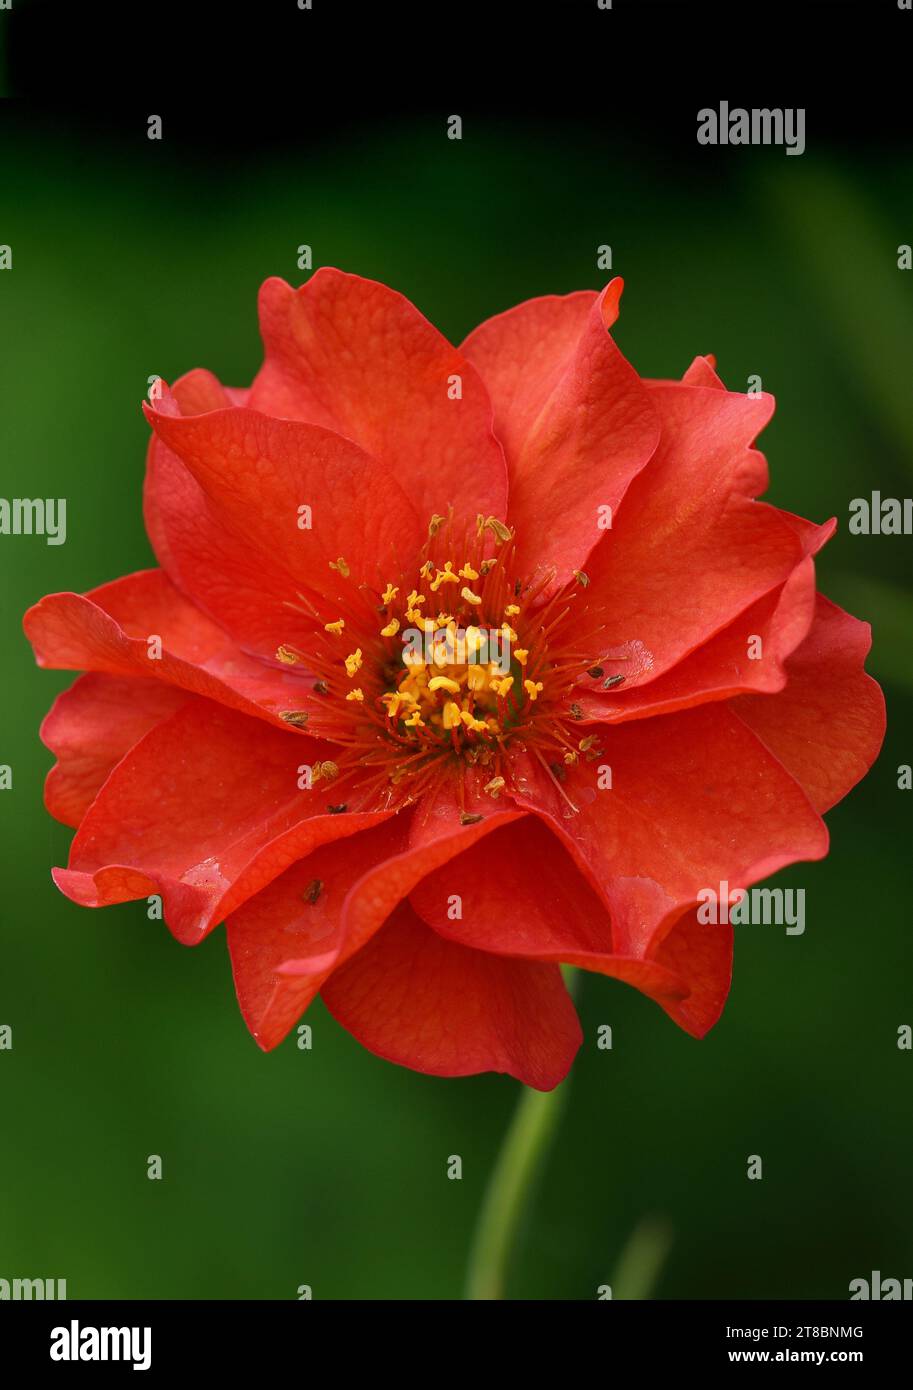 Single Scarlet Avens, also called Grecian Avens, against a natural green background Stock Photo